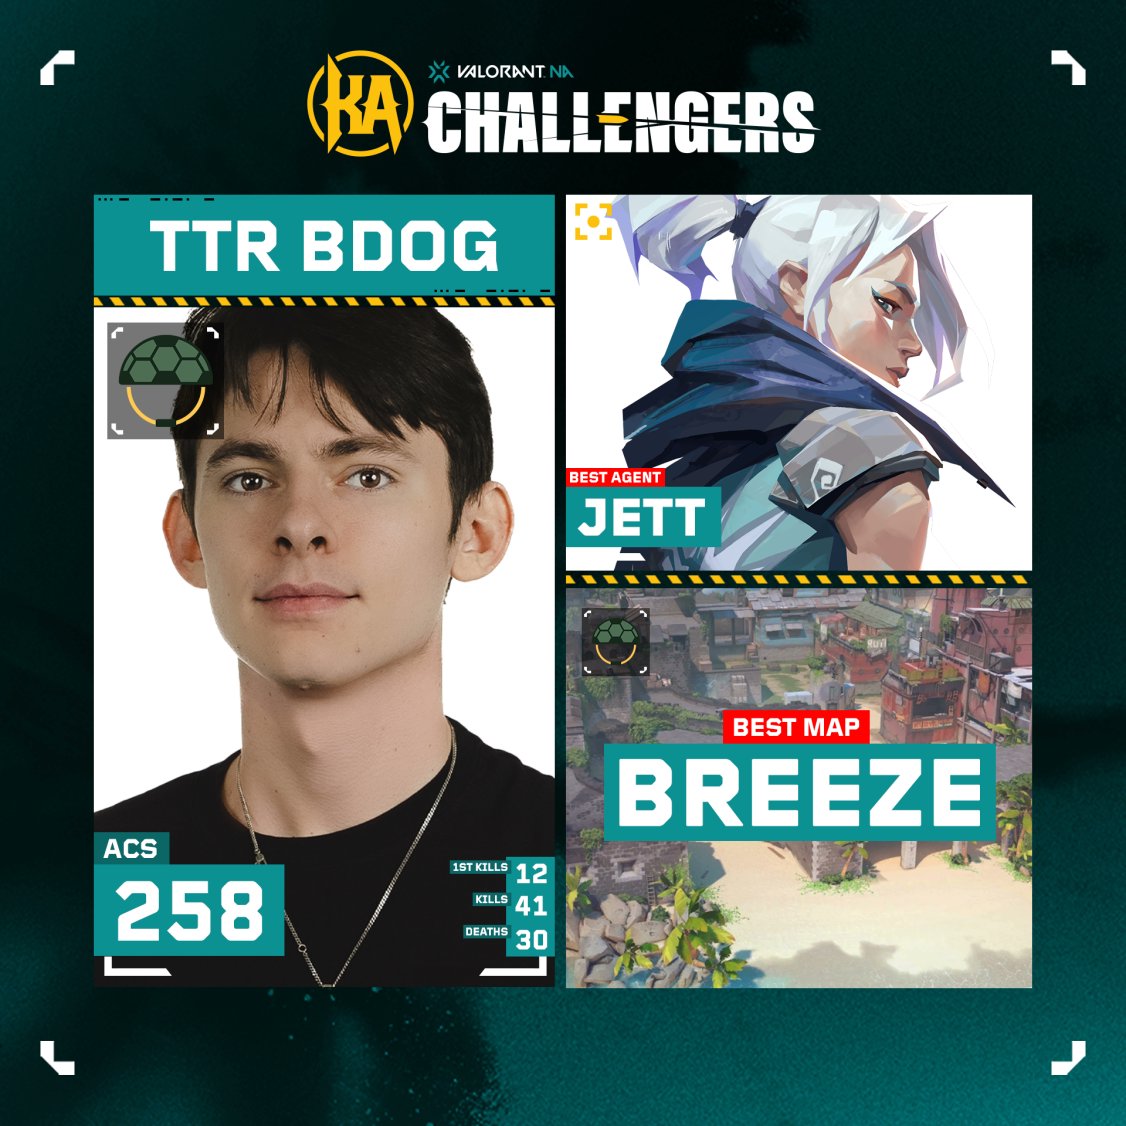 Player of the Day for Day 4 of #ChallengersNA Mid-Season Cup is @bdog2916!